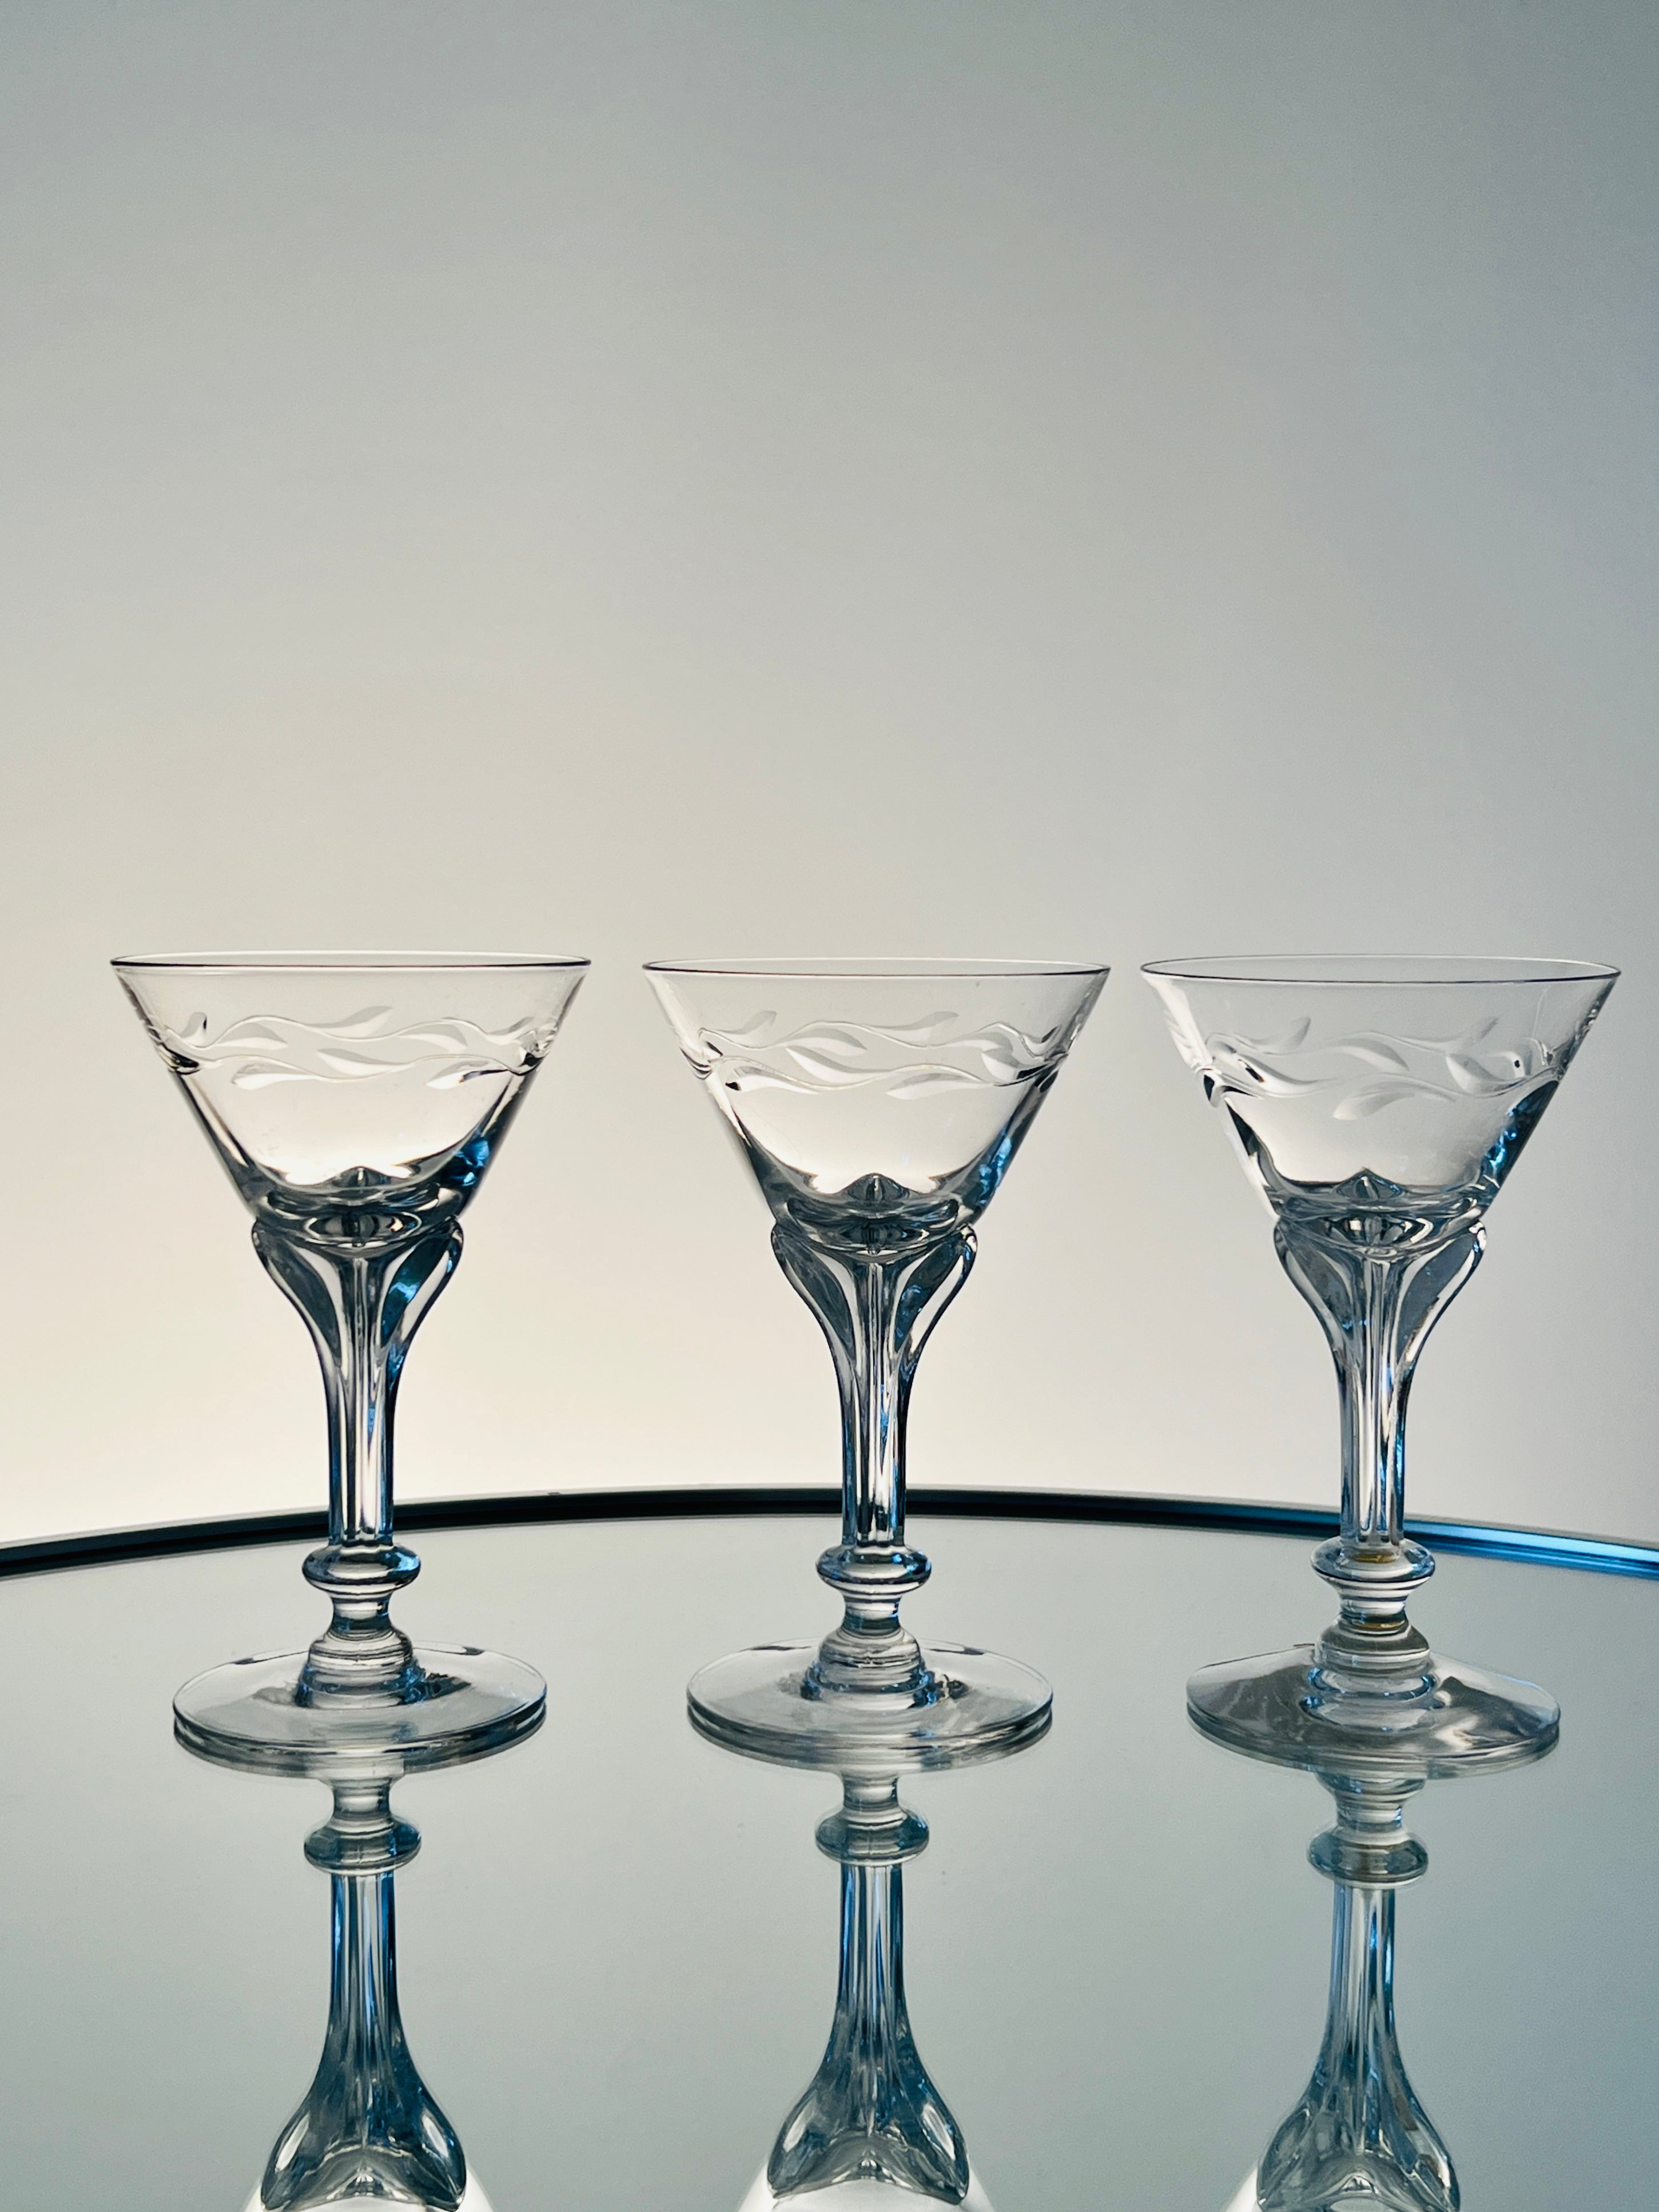 Set / 12 crystal cocktail glasses from the Lenox Wreath Collection by Tiffin. The handblown stemware feature an elegant engraved wreath motif and a stylized floral stem, invoking elements of both Art Nouveau and Art Deco designs. Can be used as